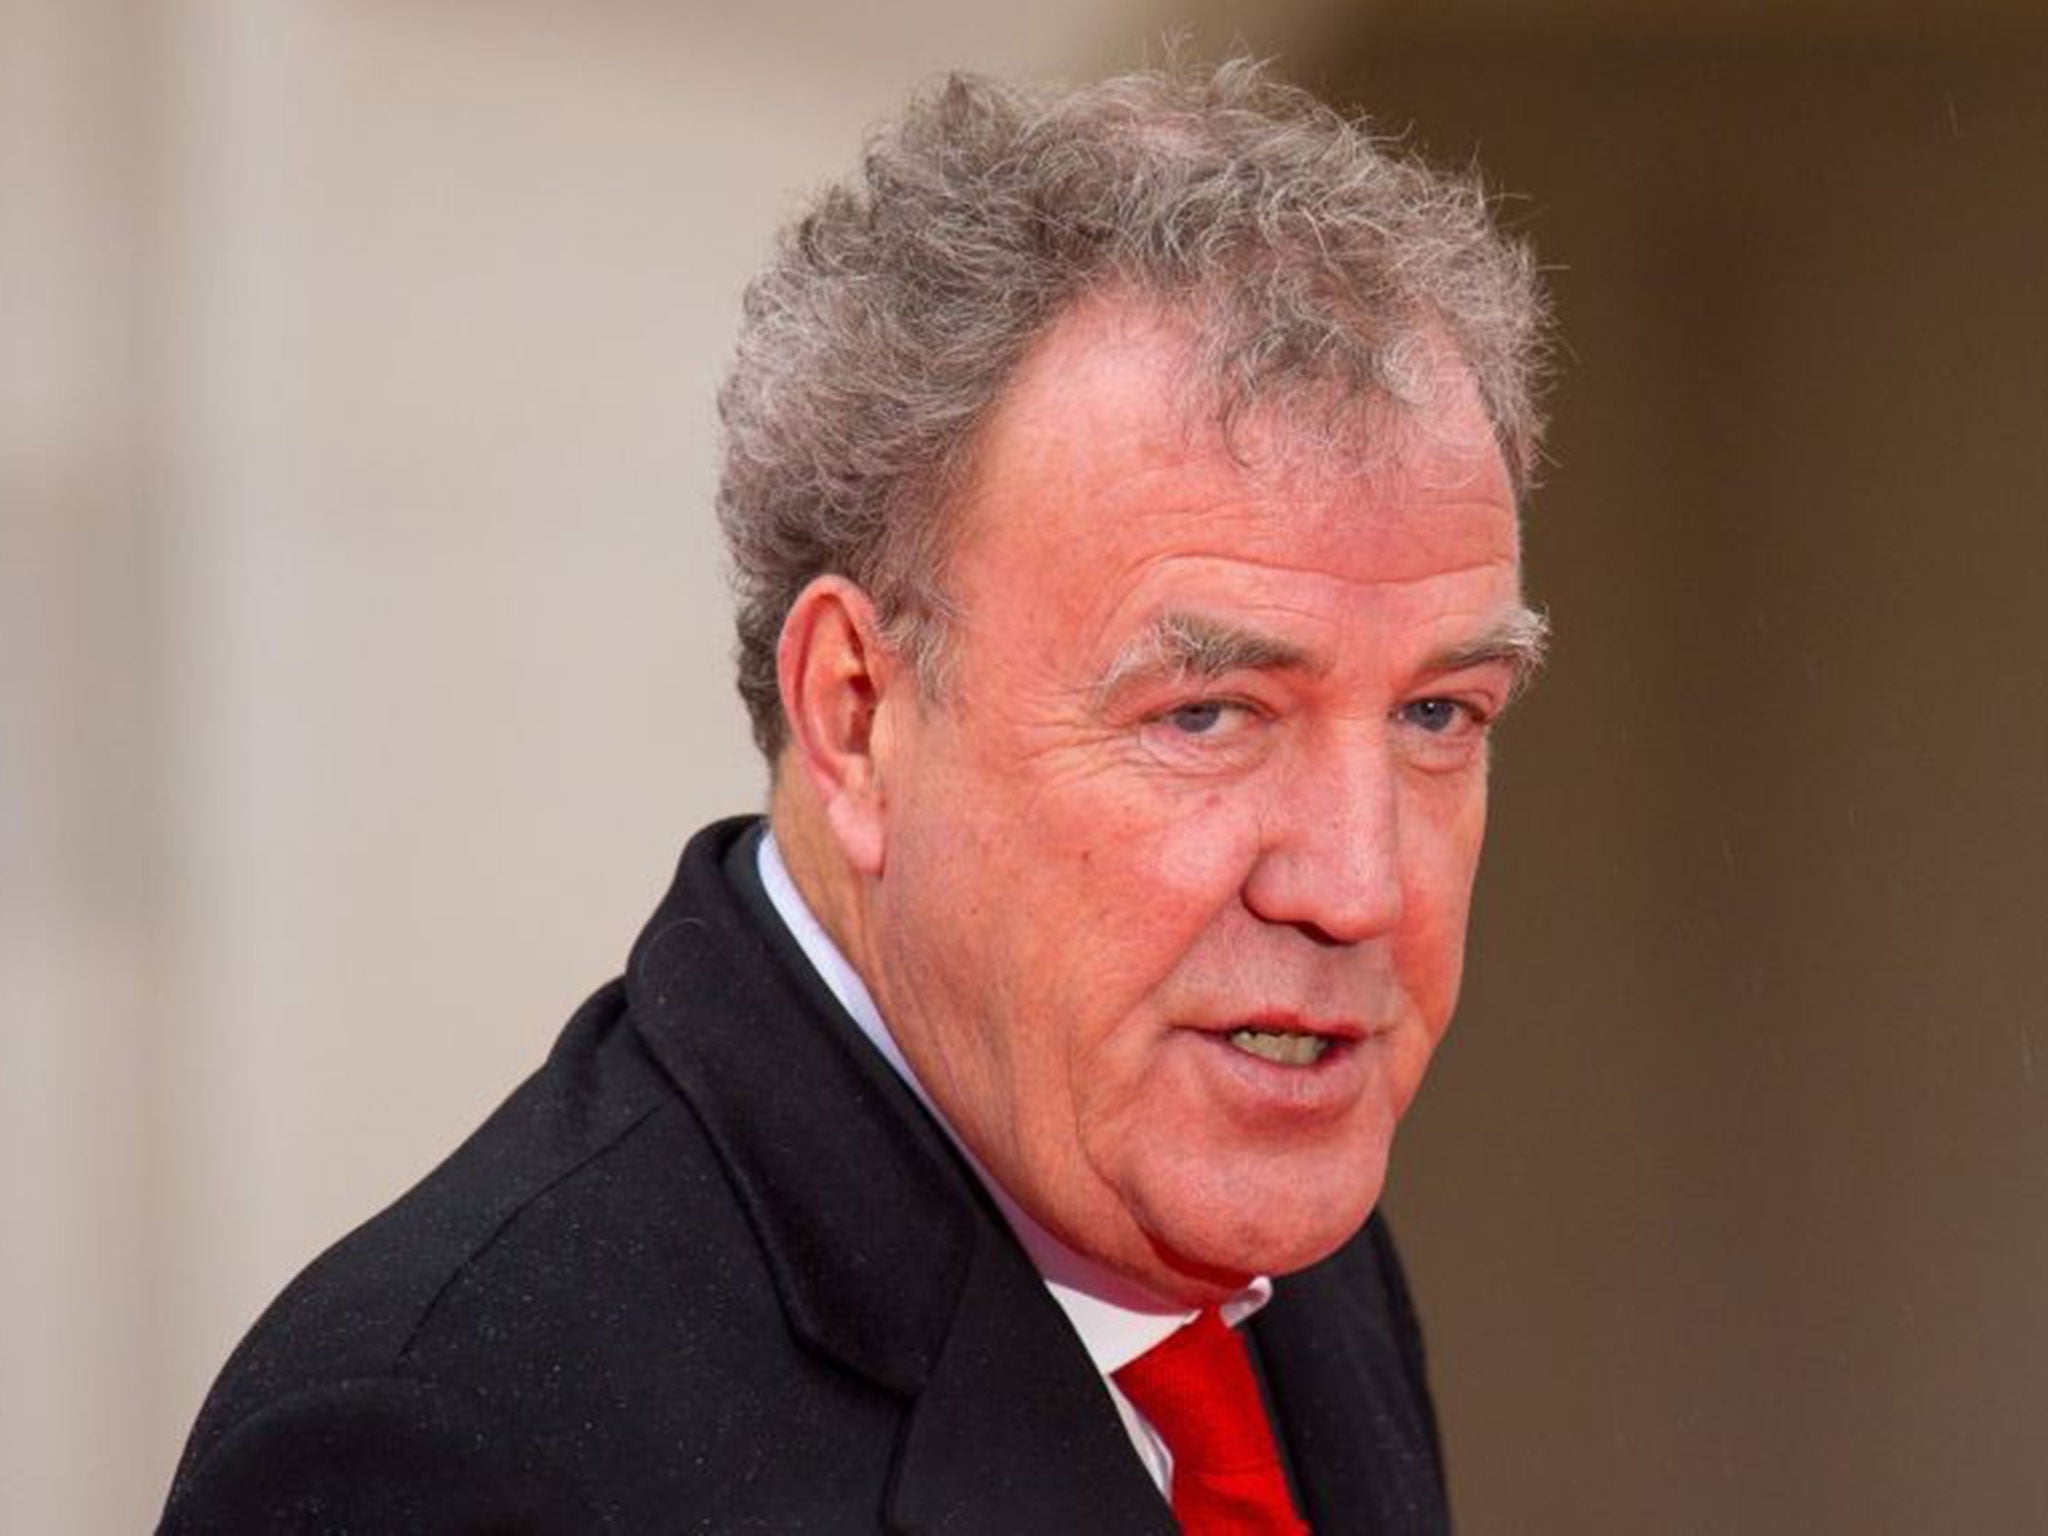 Jeremy Clarkson has issued an apology to the former Top Gear producer he punched after settling a £100,000 racial discrimination and personal injury claim